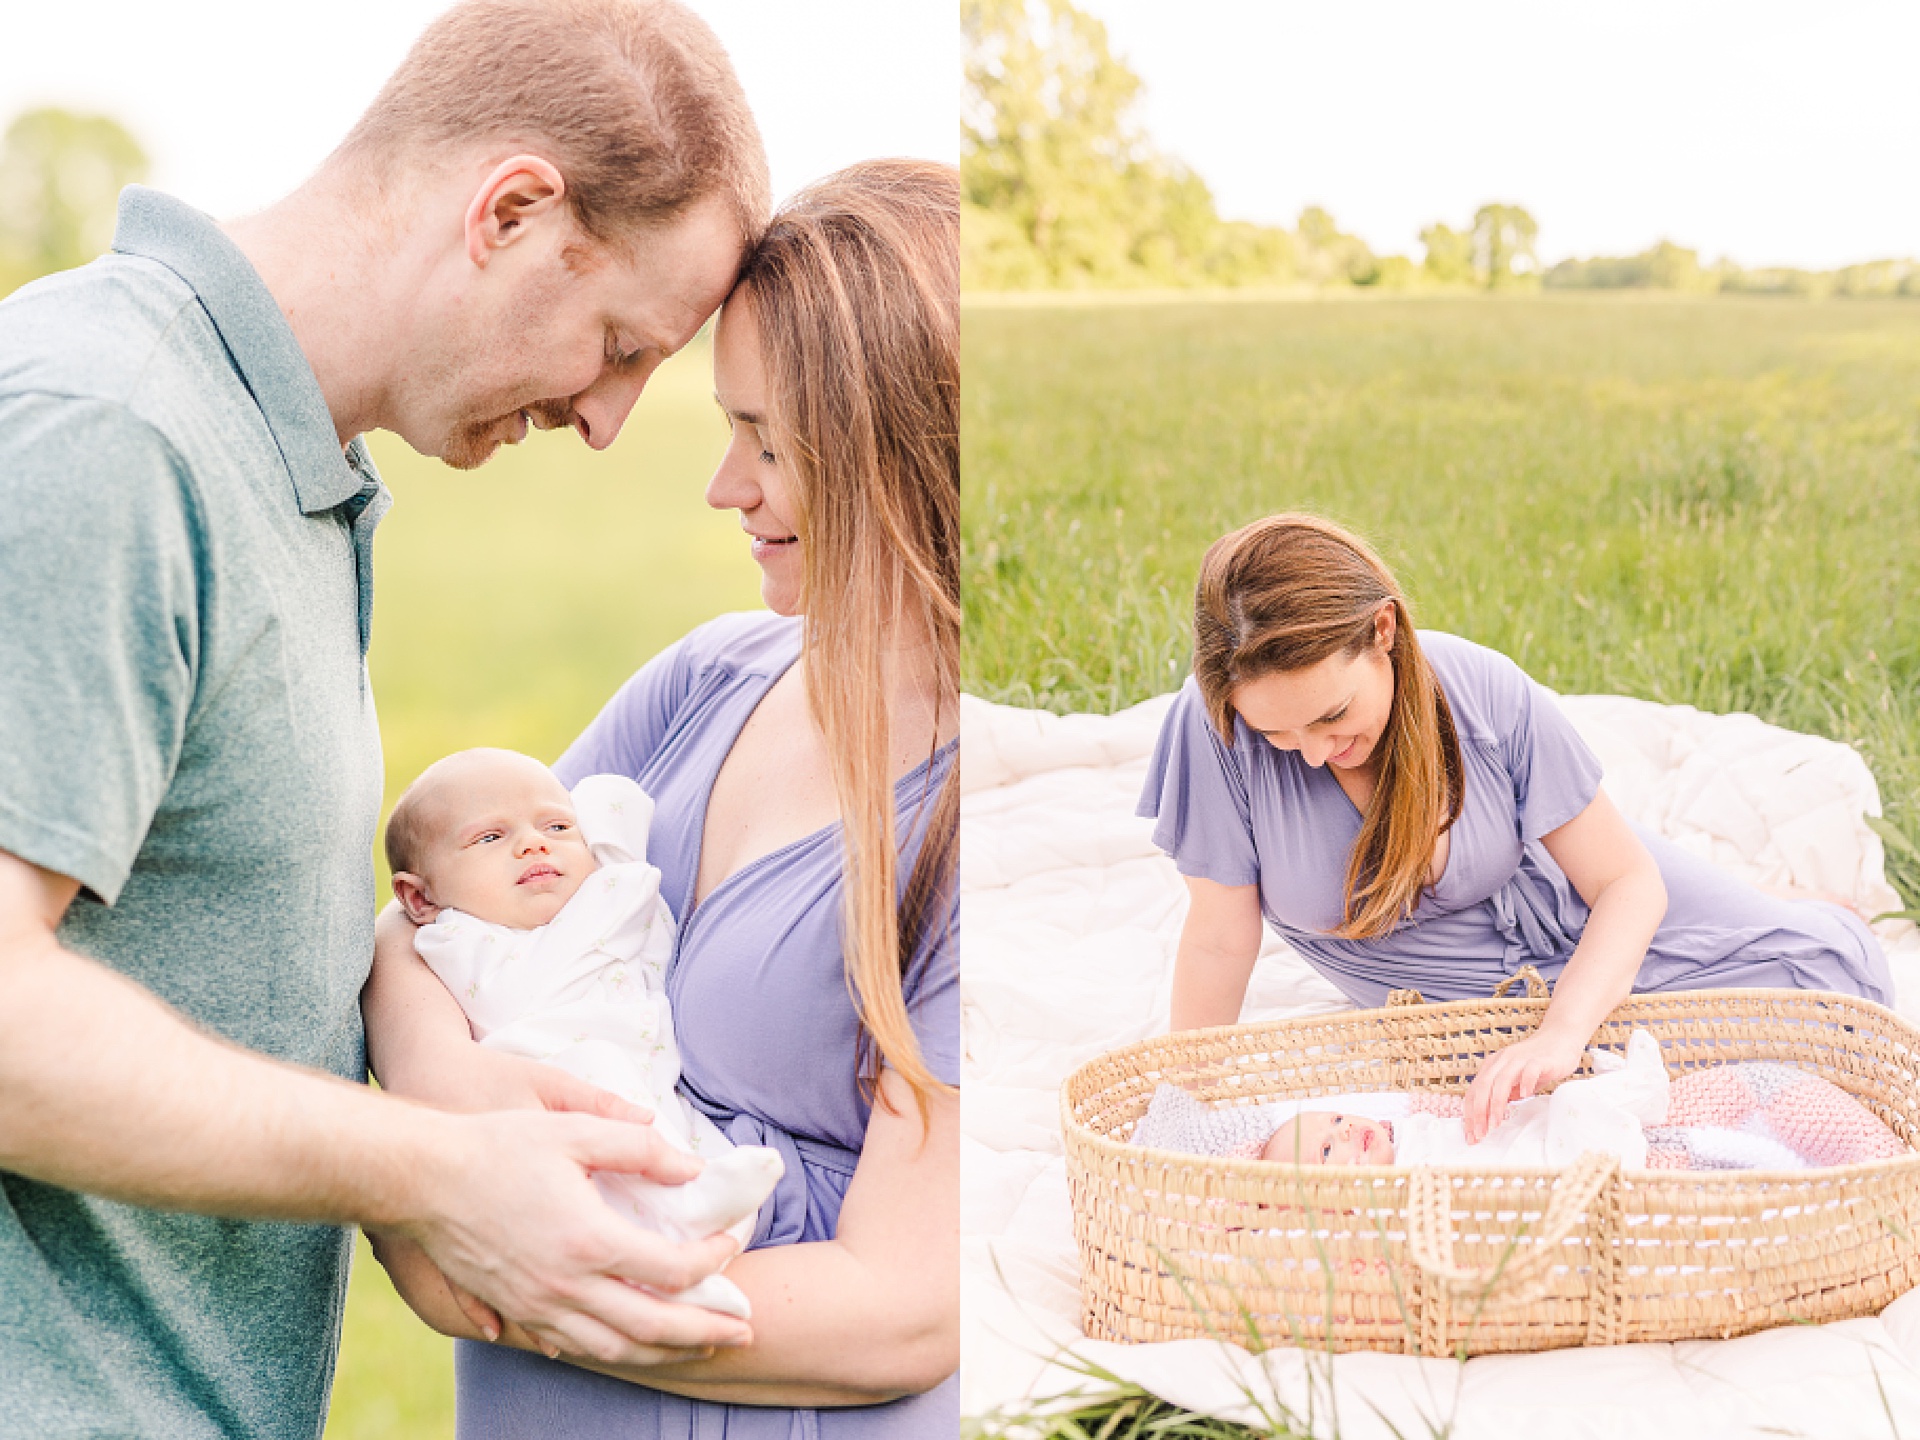 parents hold newborn and mom looks at newborn in basket during outdoor newborn photo session with Sara Sniderman Photography at Heard Farm Wayland Massachusetts